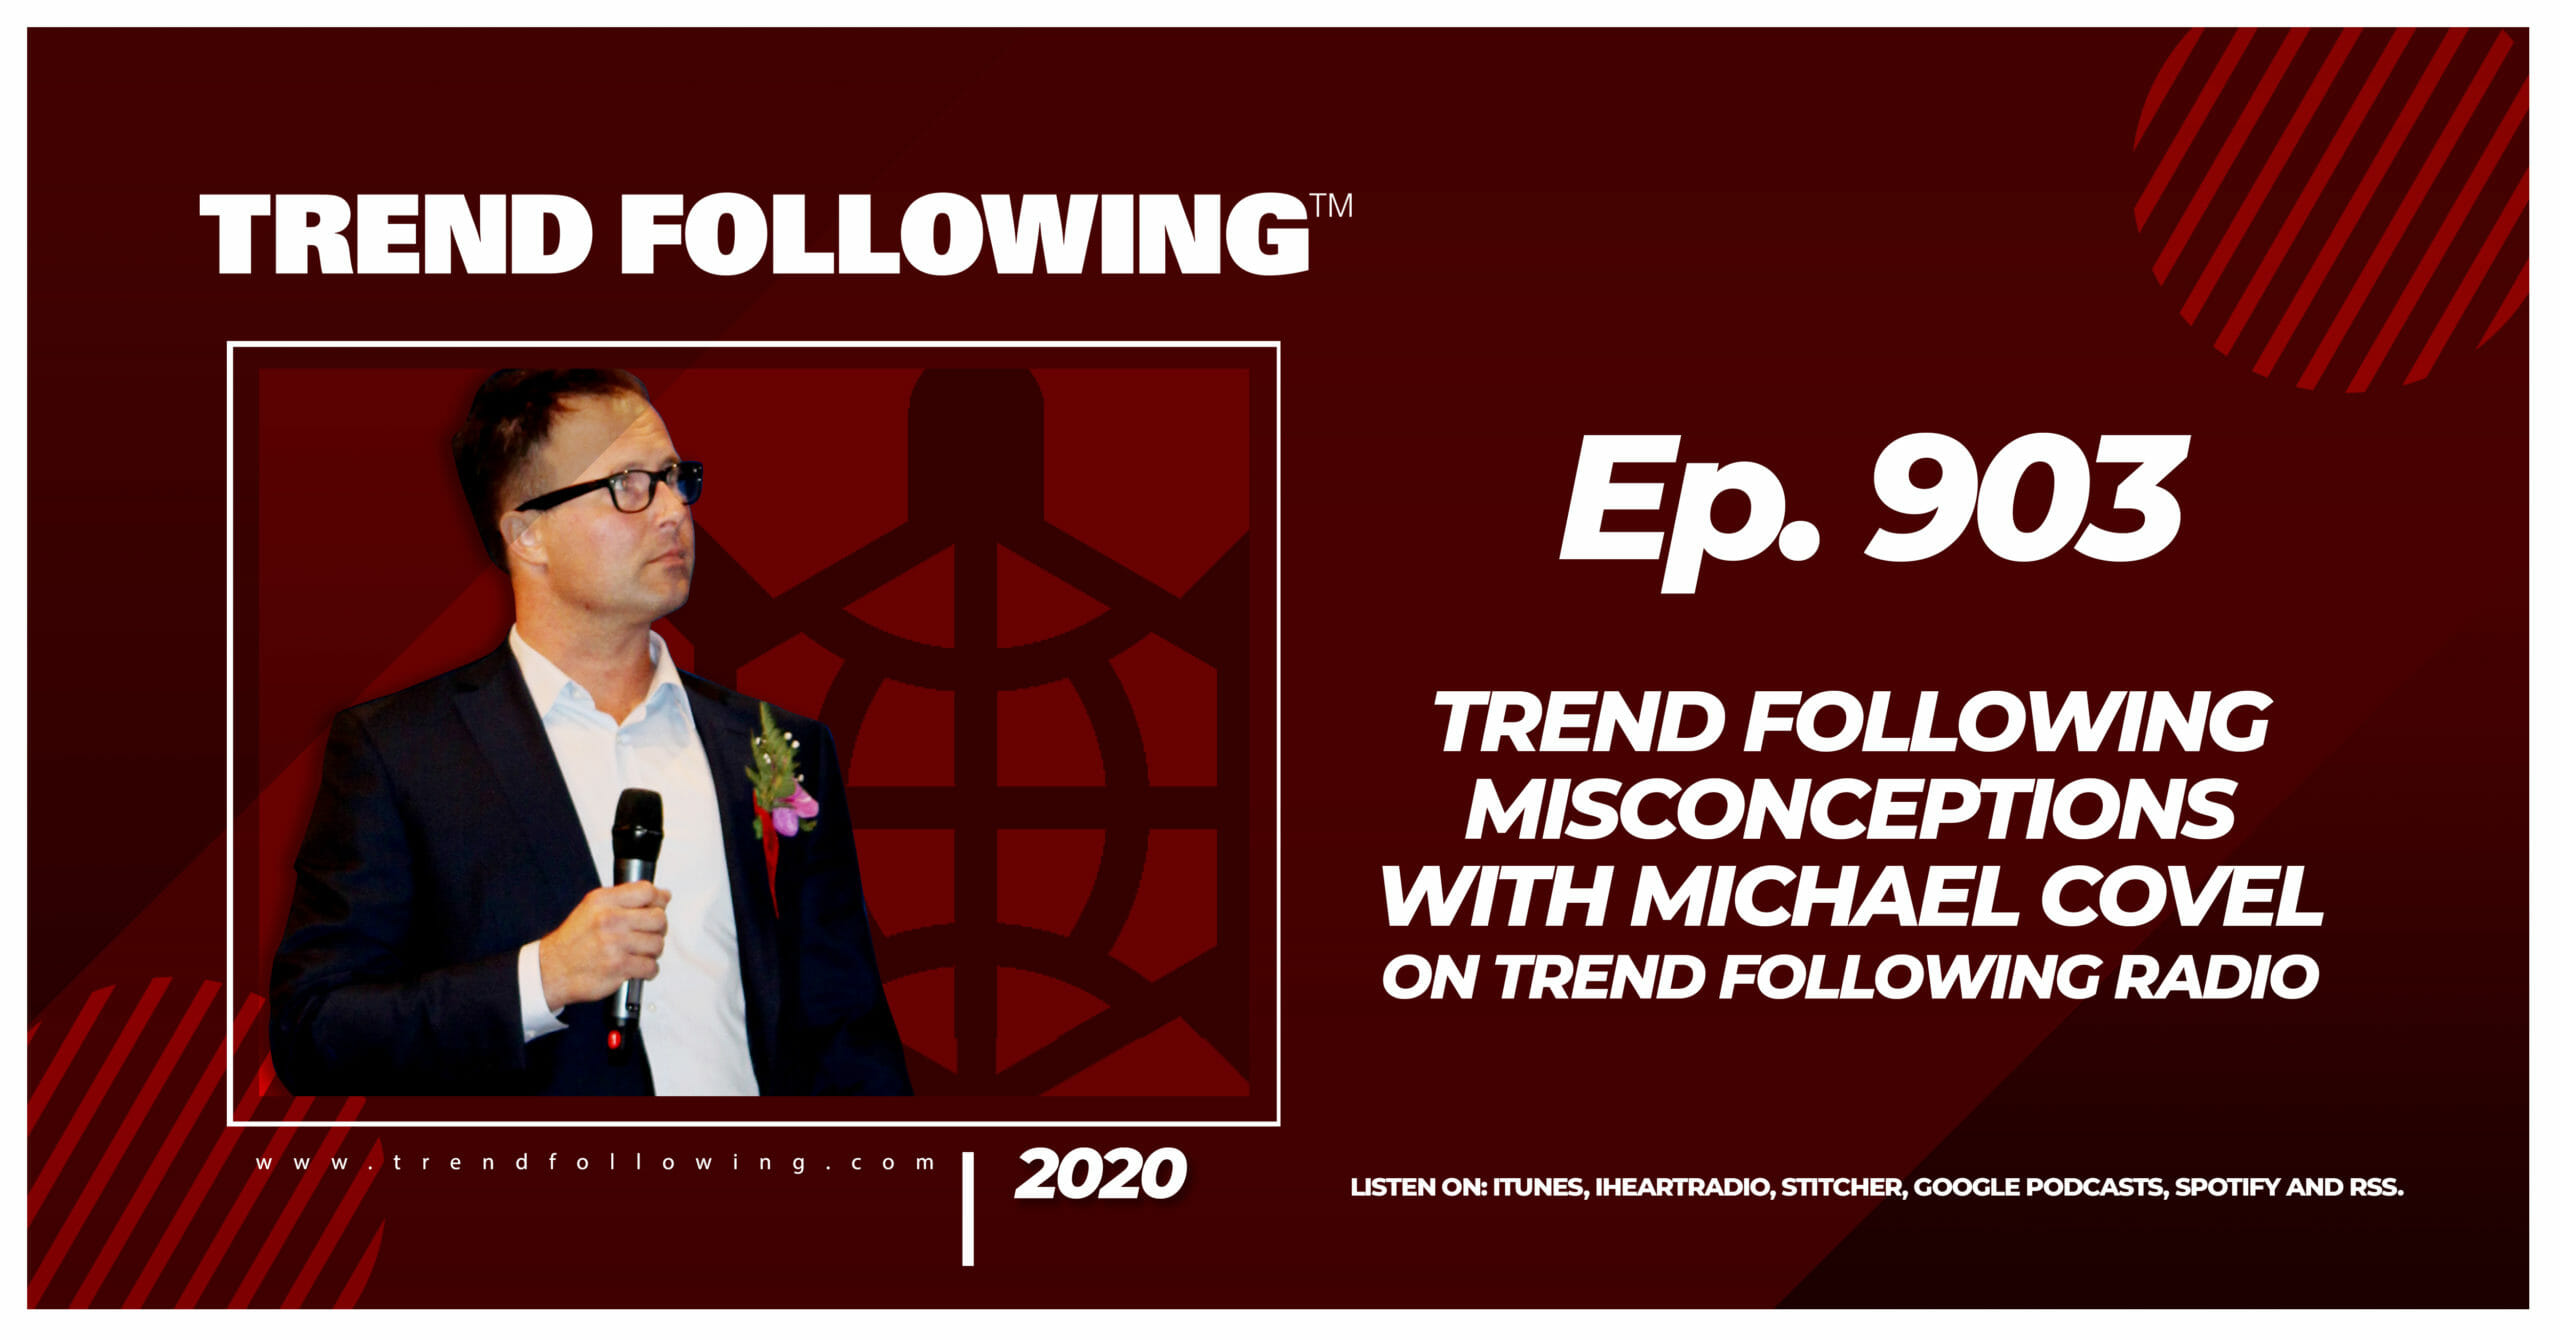 Ep. 903: Trend Following Misconceptions with Michael Covel on Trend Following Radio